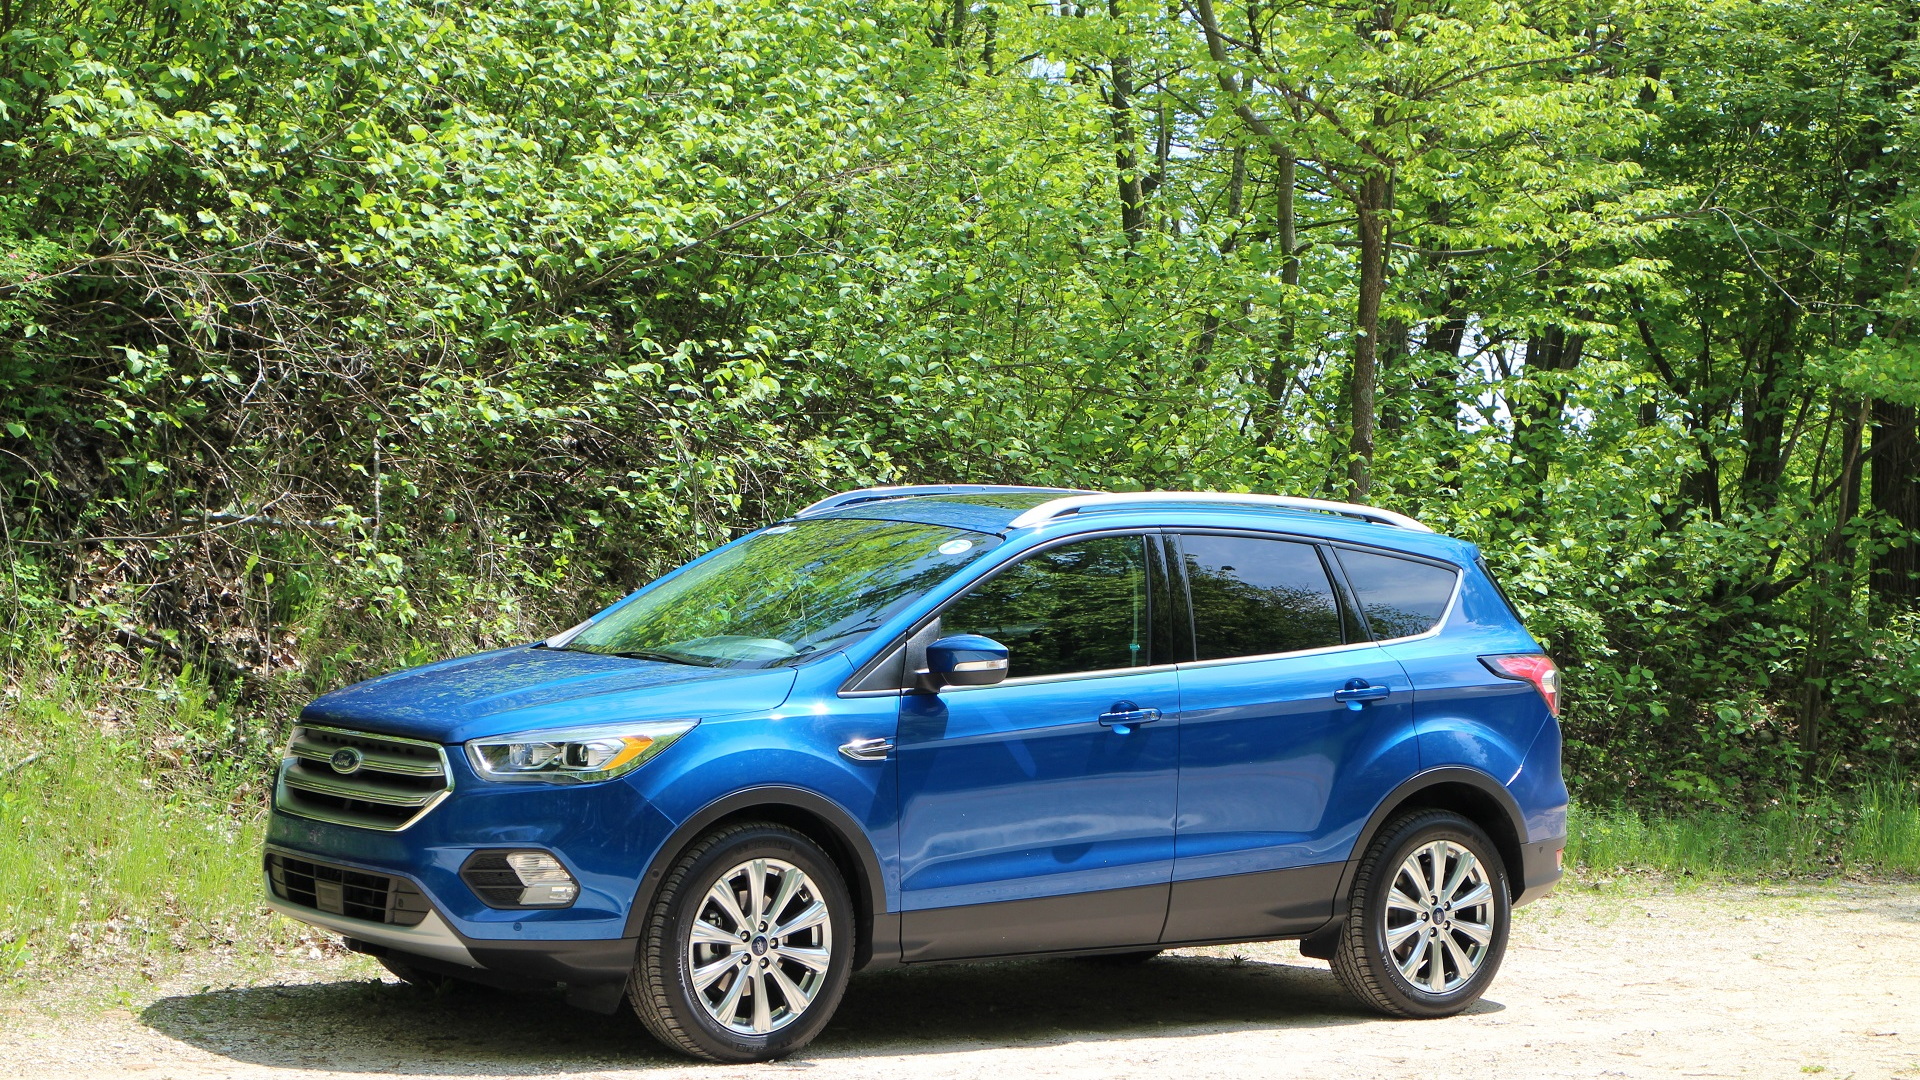 2017 Ford Escape, Elkhart Lake, Wisconsin, May 2016